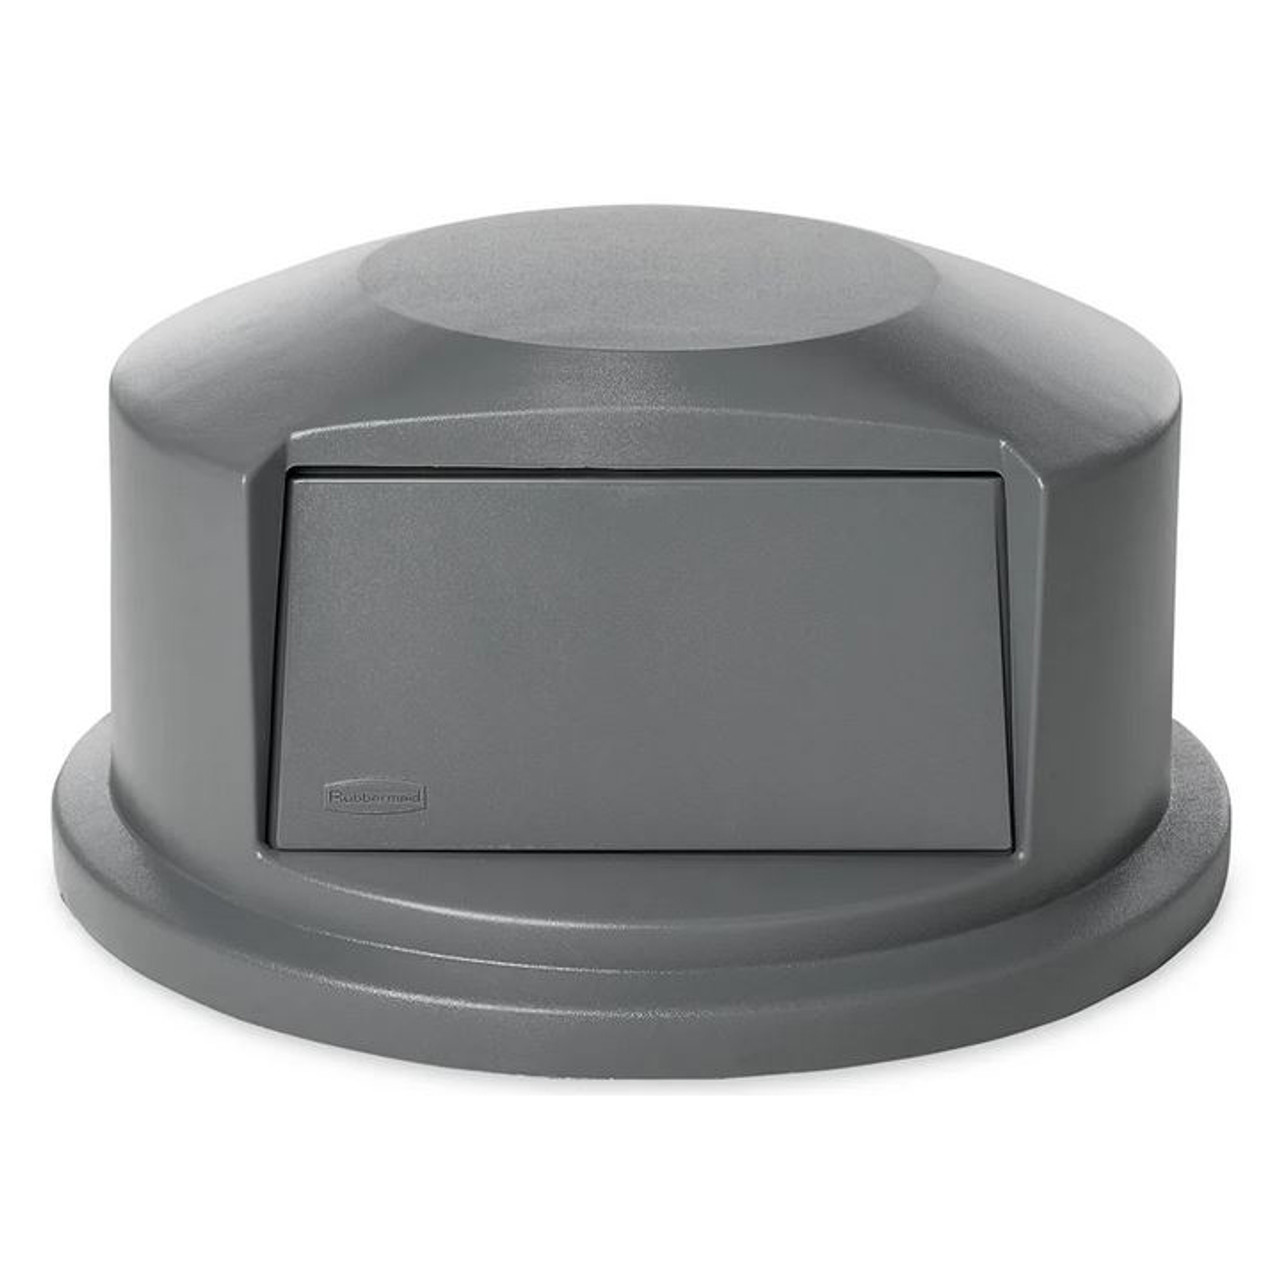 Rubbermaid Brute RCP263788GY 32 Gallon Gray Dome Lid